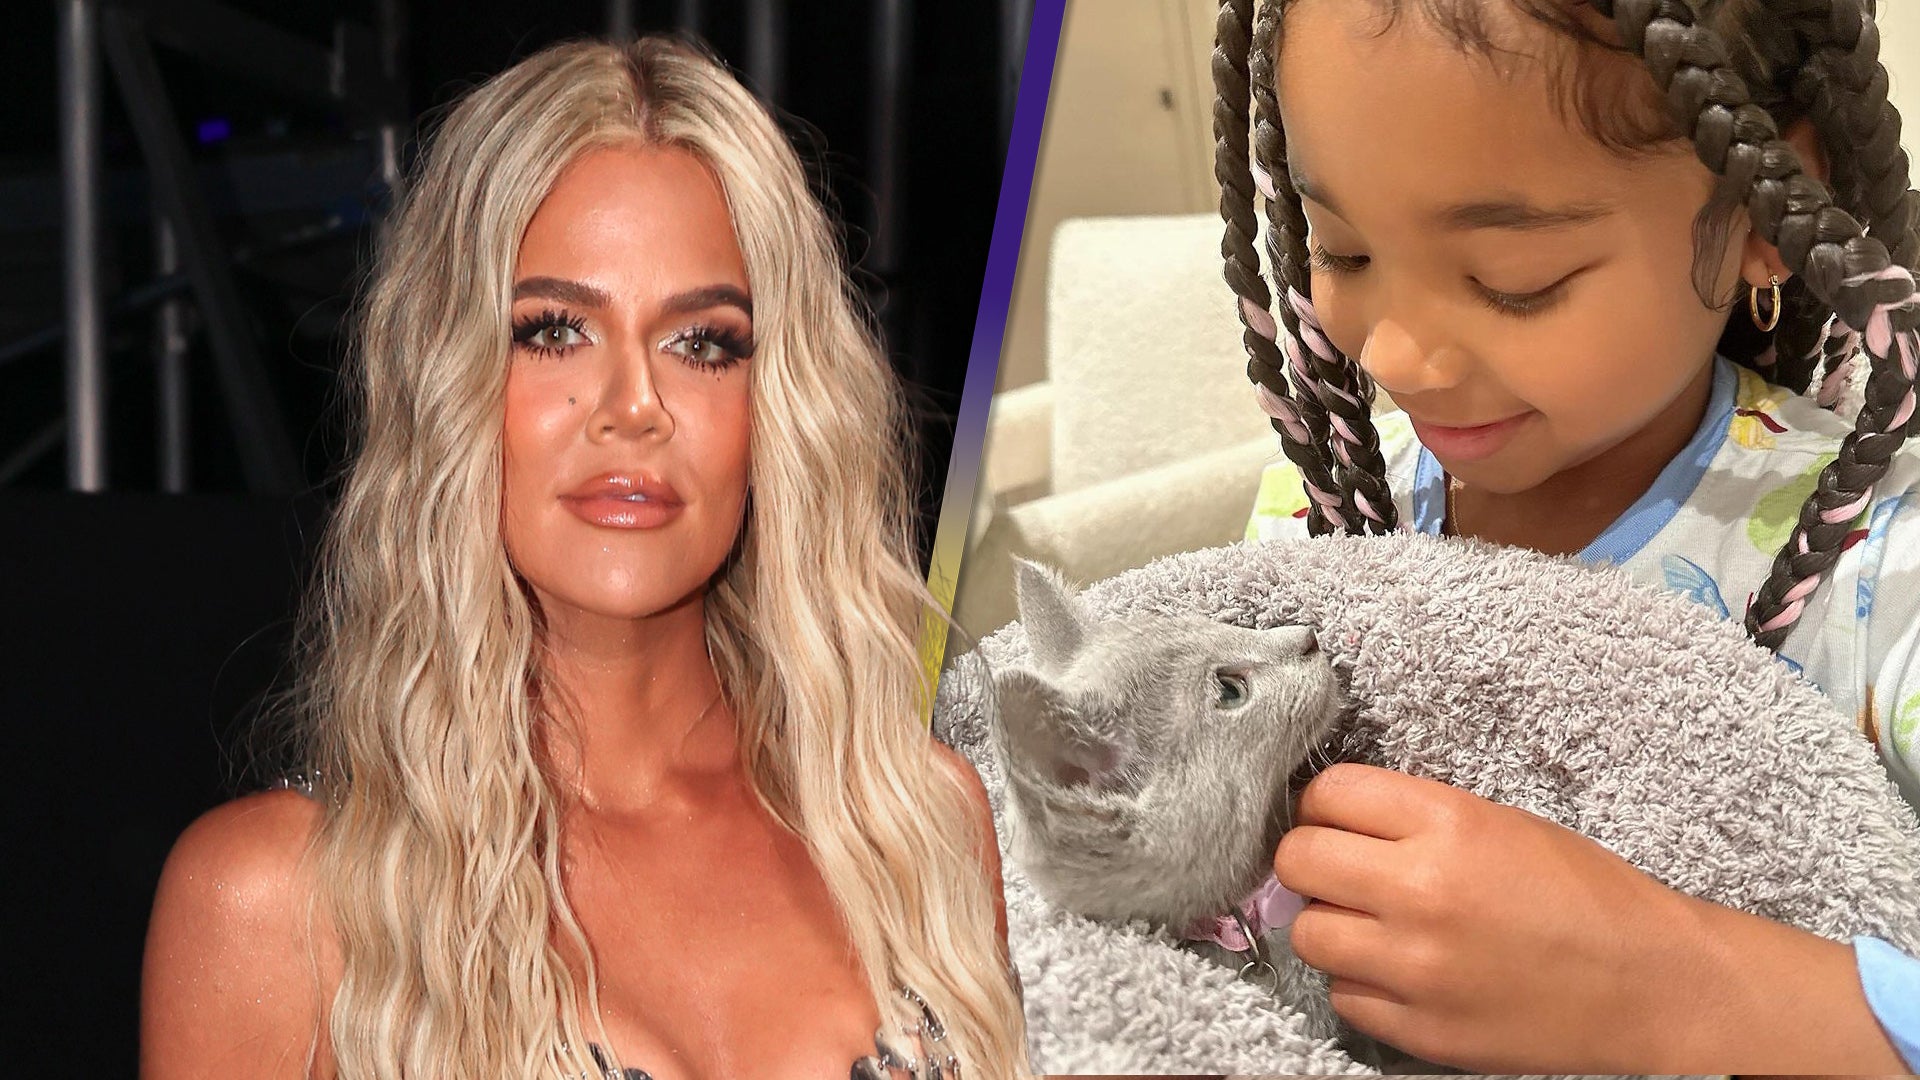 Khloé Kardashian Introduces the Family's Newest Addition